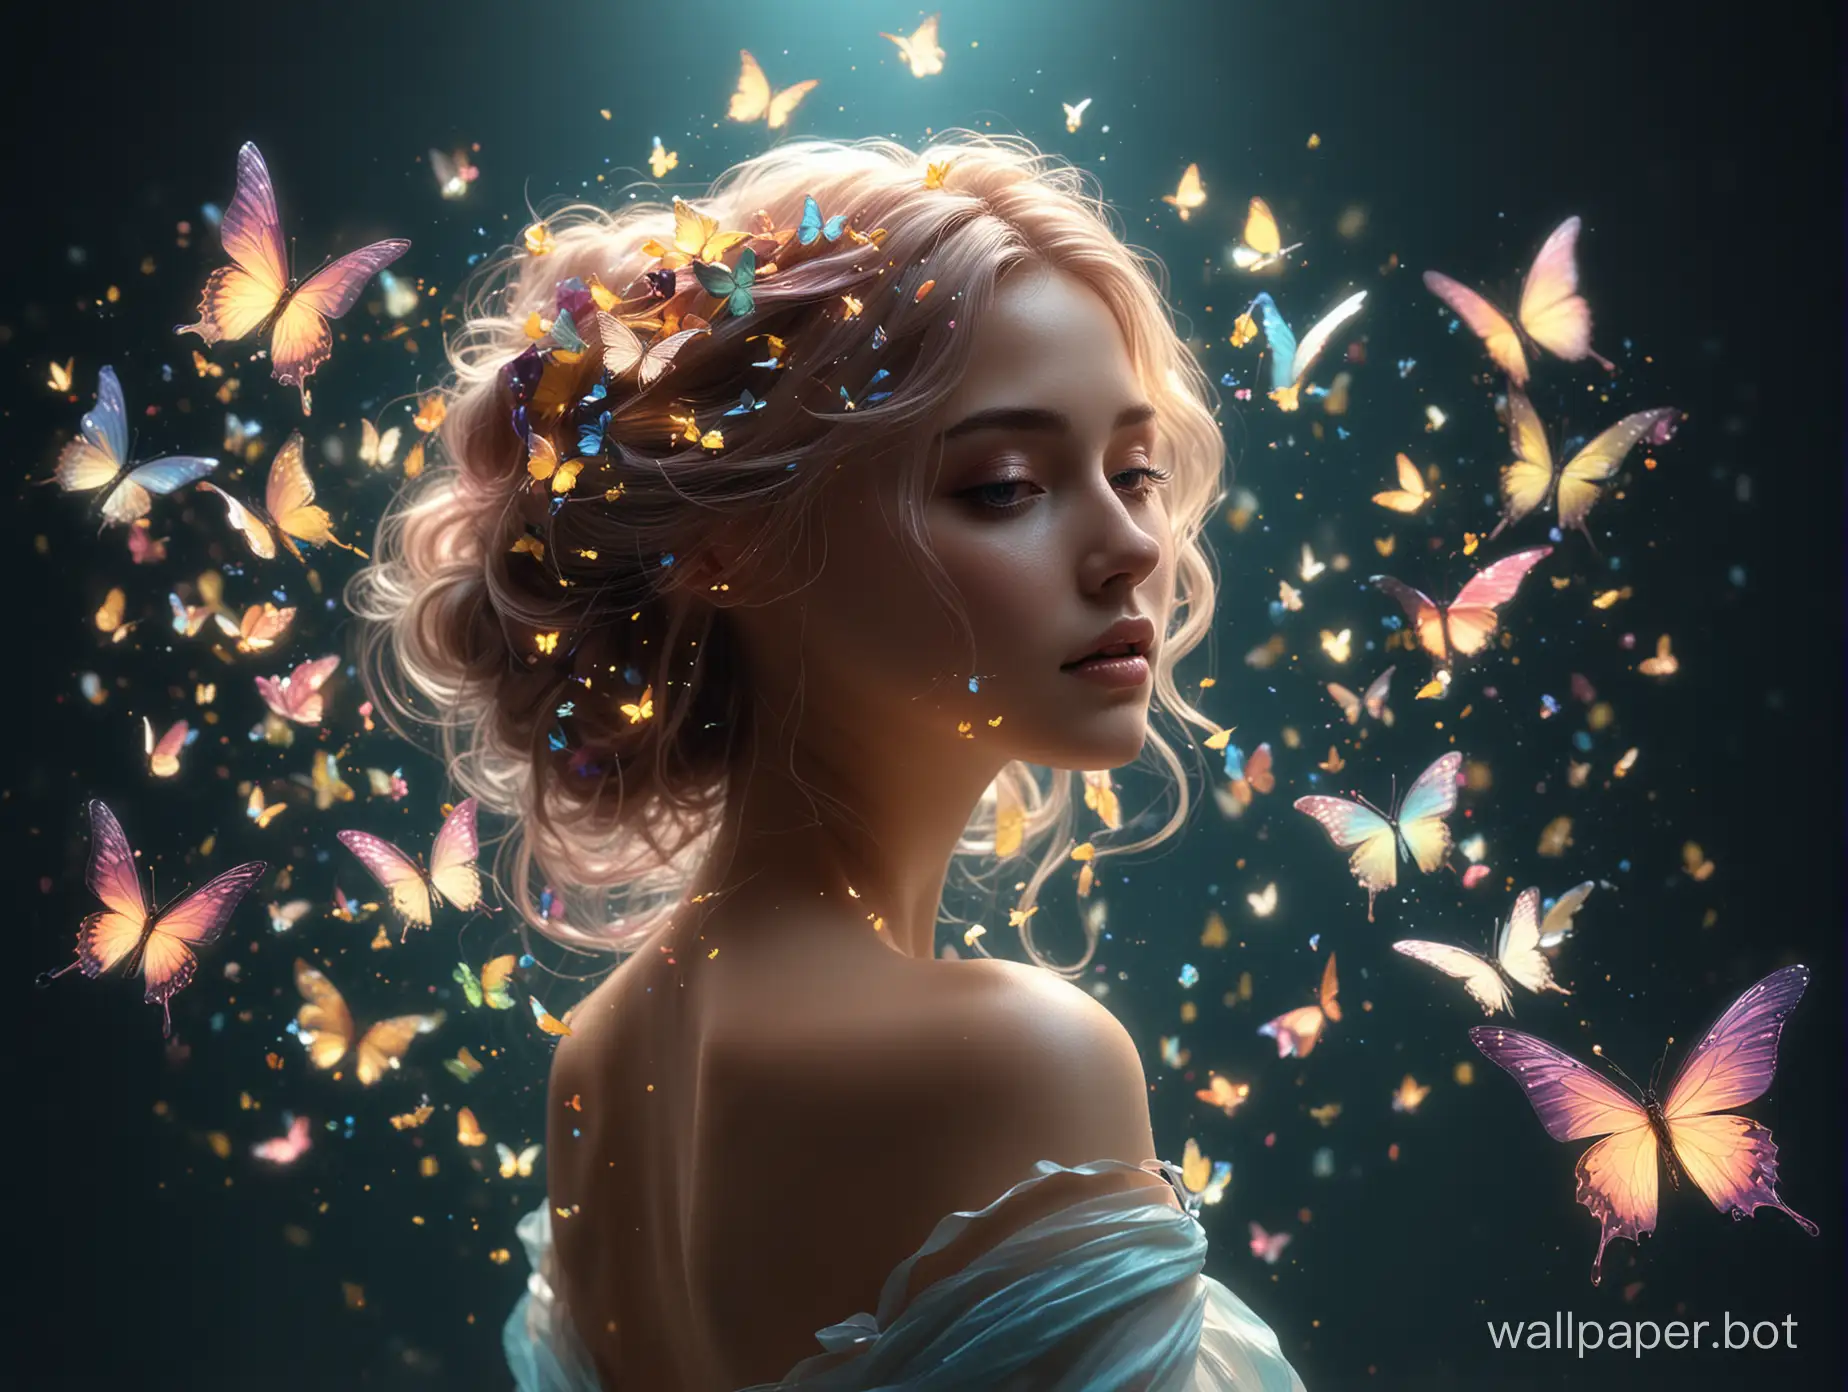 A mesmerizing 3D render of an ethereal woman with vibrant, luminescent butterflies adorning her radiant form. Her flowing hair, tied with a delicate bow, cascades down her back. The butterflies are a dazzling blend of yellow, pink, green, and blue, each illuminating different parts of the figure's contour. The dark backdrop enhances the scene's mystical atmosphere, with a subtle glow emanating from the butterflies. The overall composition exudes a dreamlike, otherworldly quality., 3d render